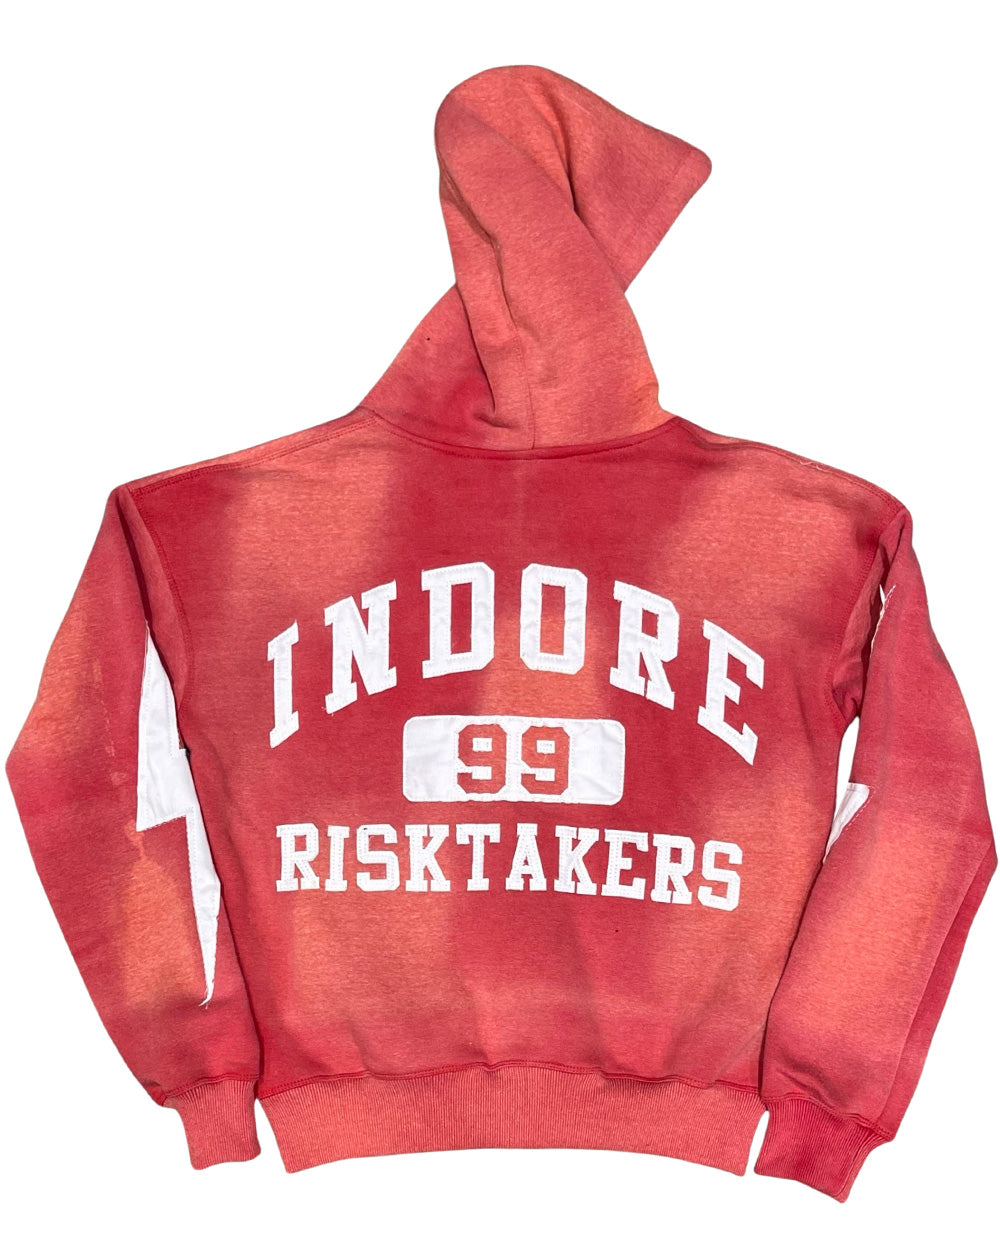 RISK TAKERS SWEATSUIT - RED